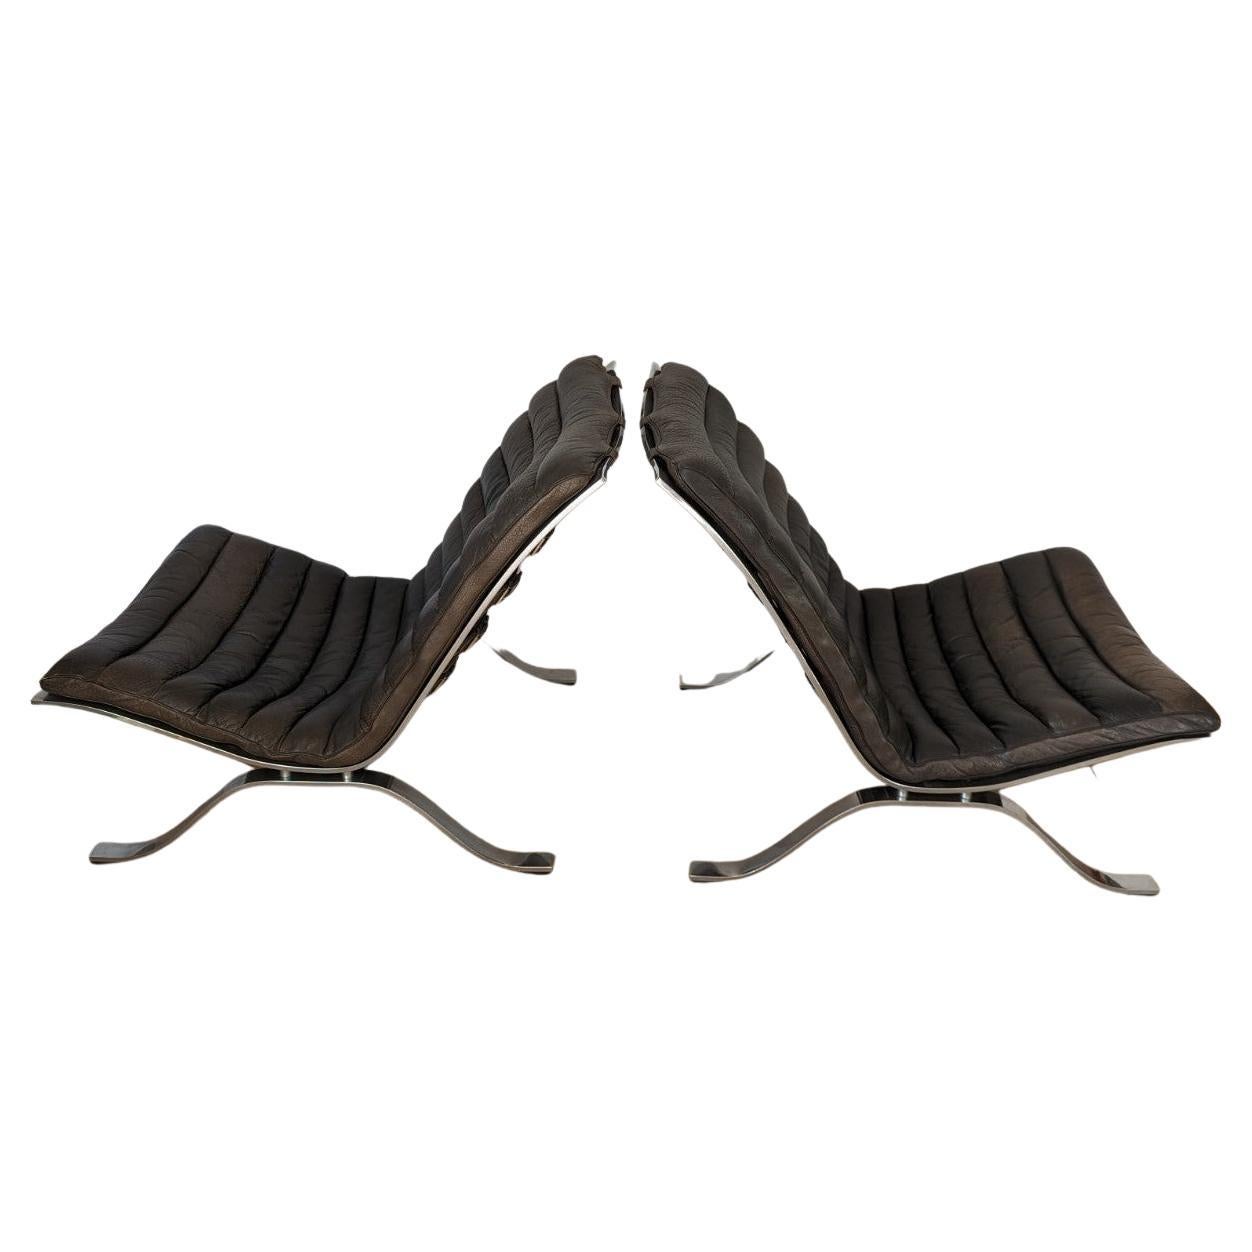 Pair of Vintage Arne Norrell 'Ari' Chairs for Mobel Ab in Black Leather